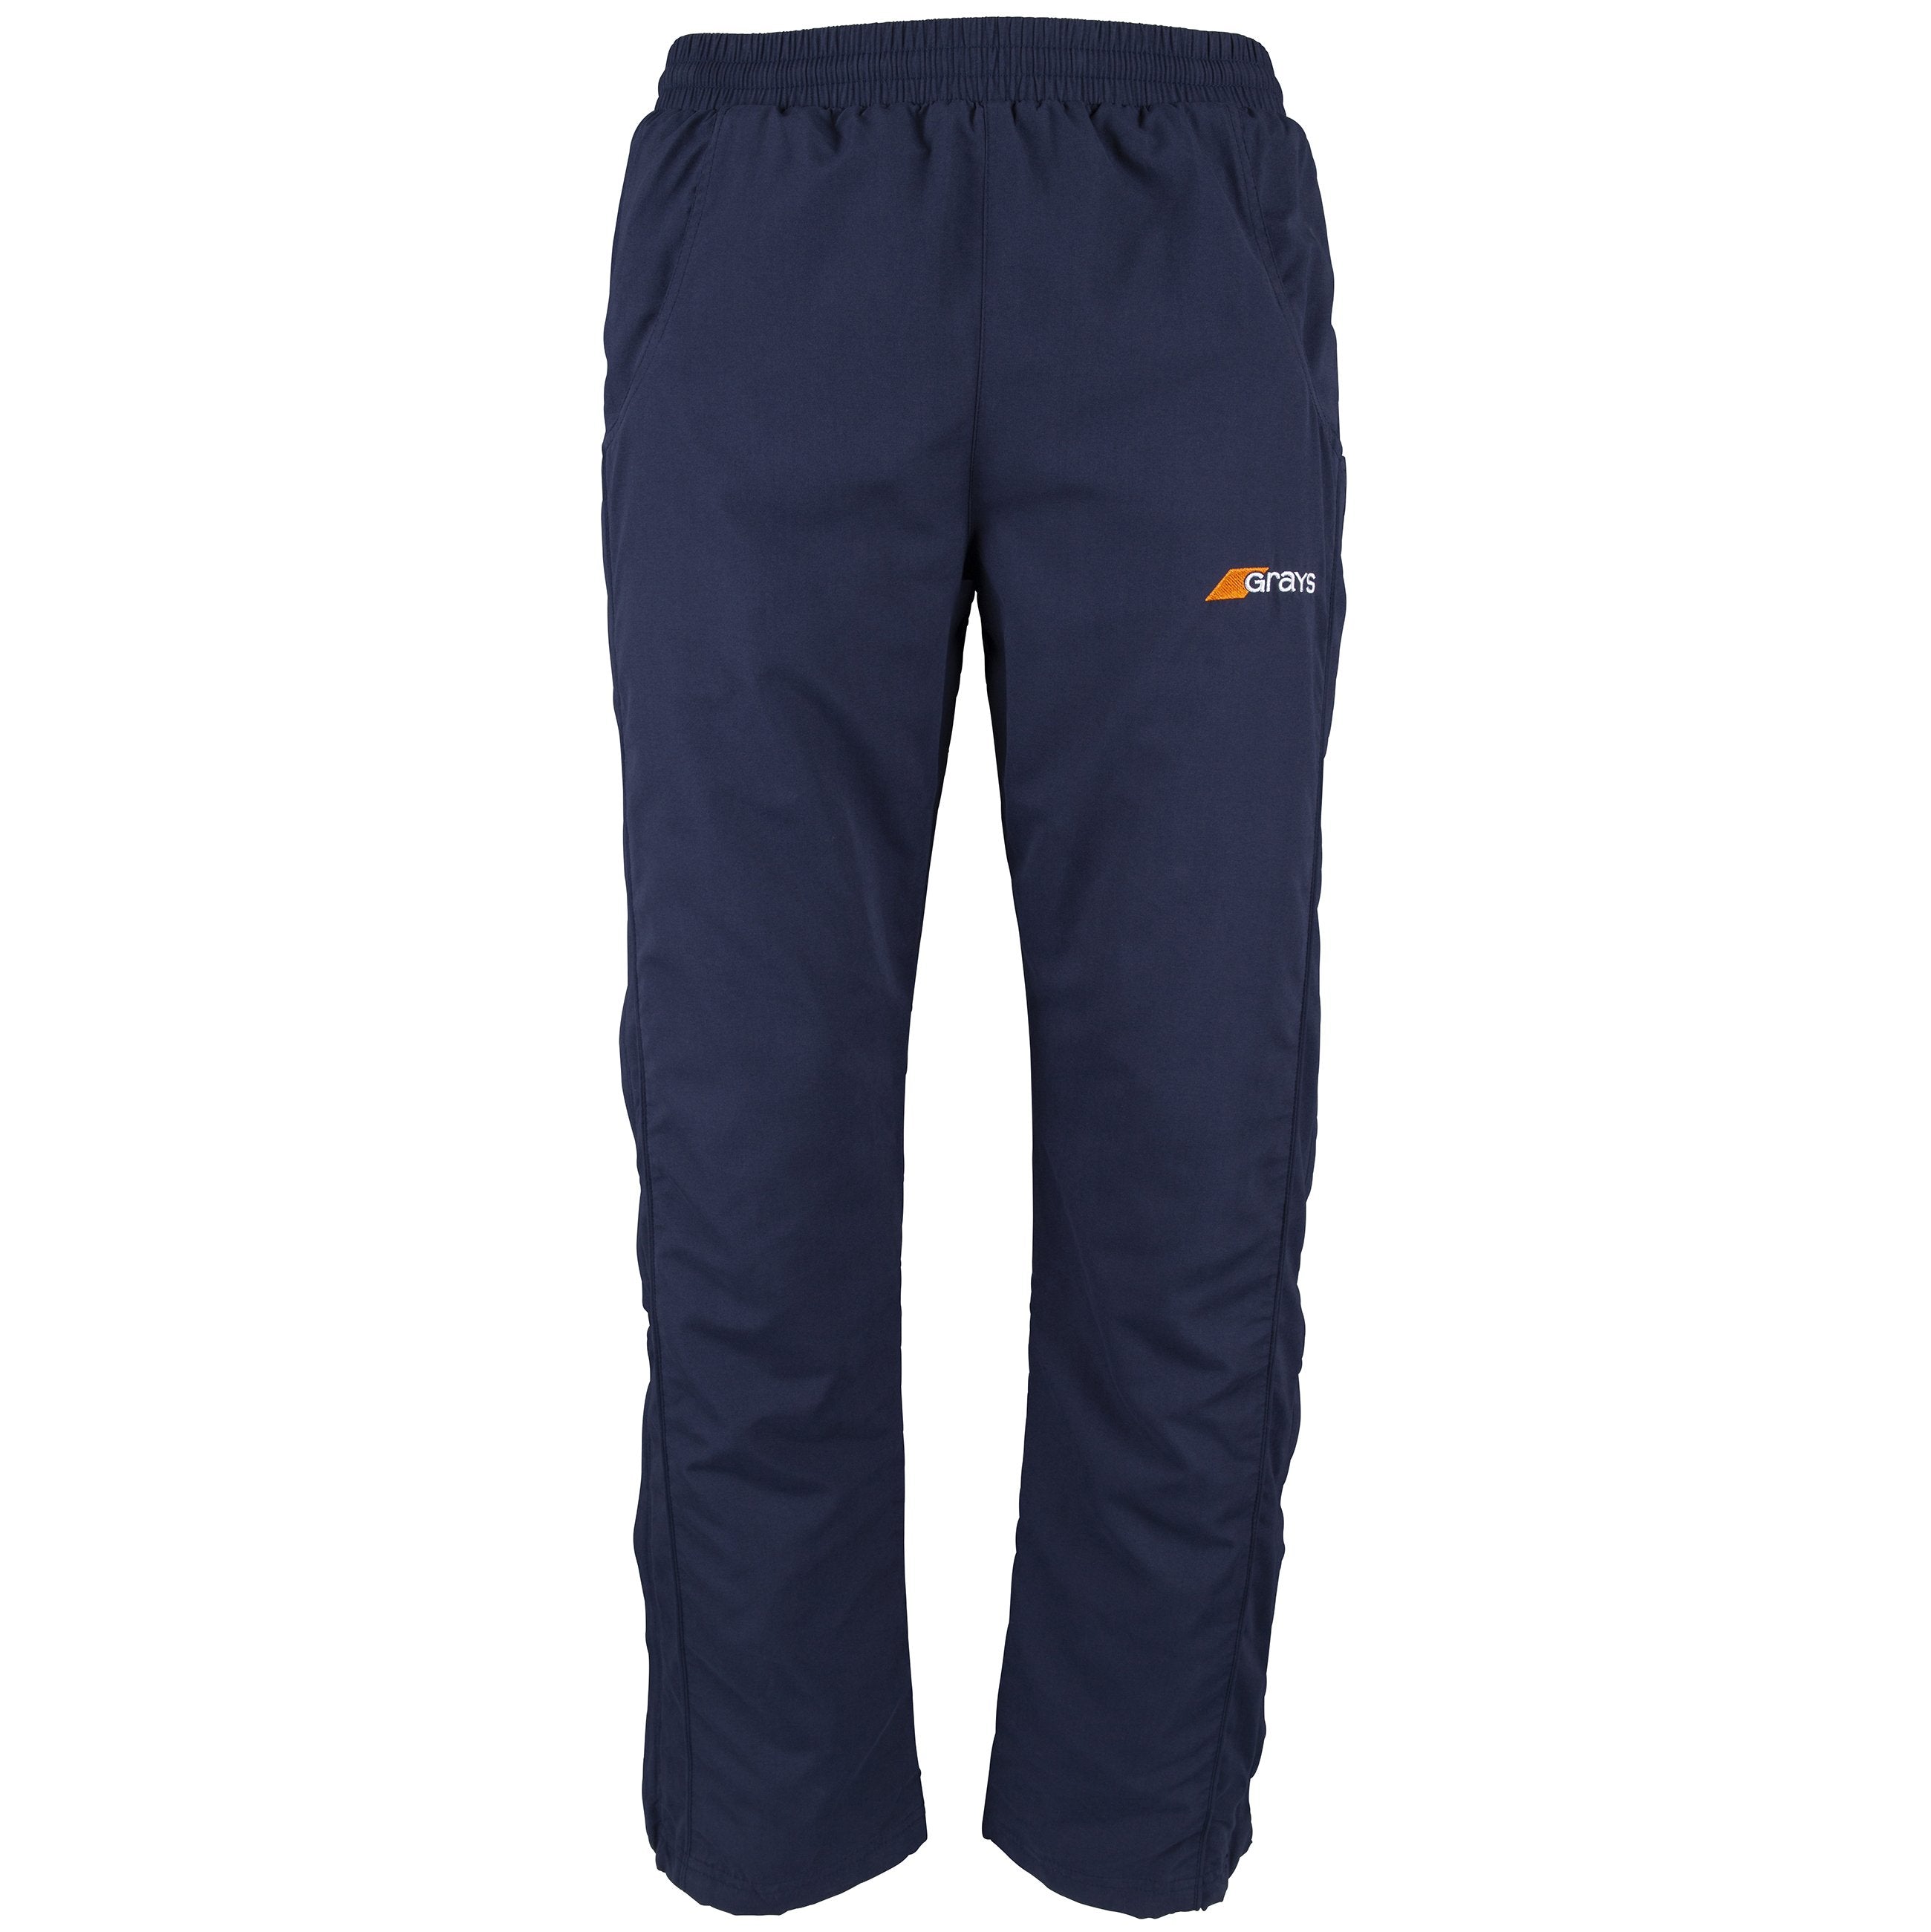 2600 HCCC18 6110805 Trousers Glide Mens Dark Navy Front